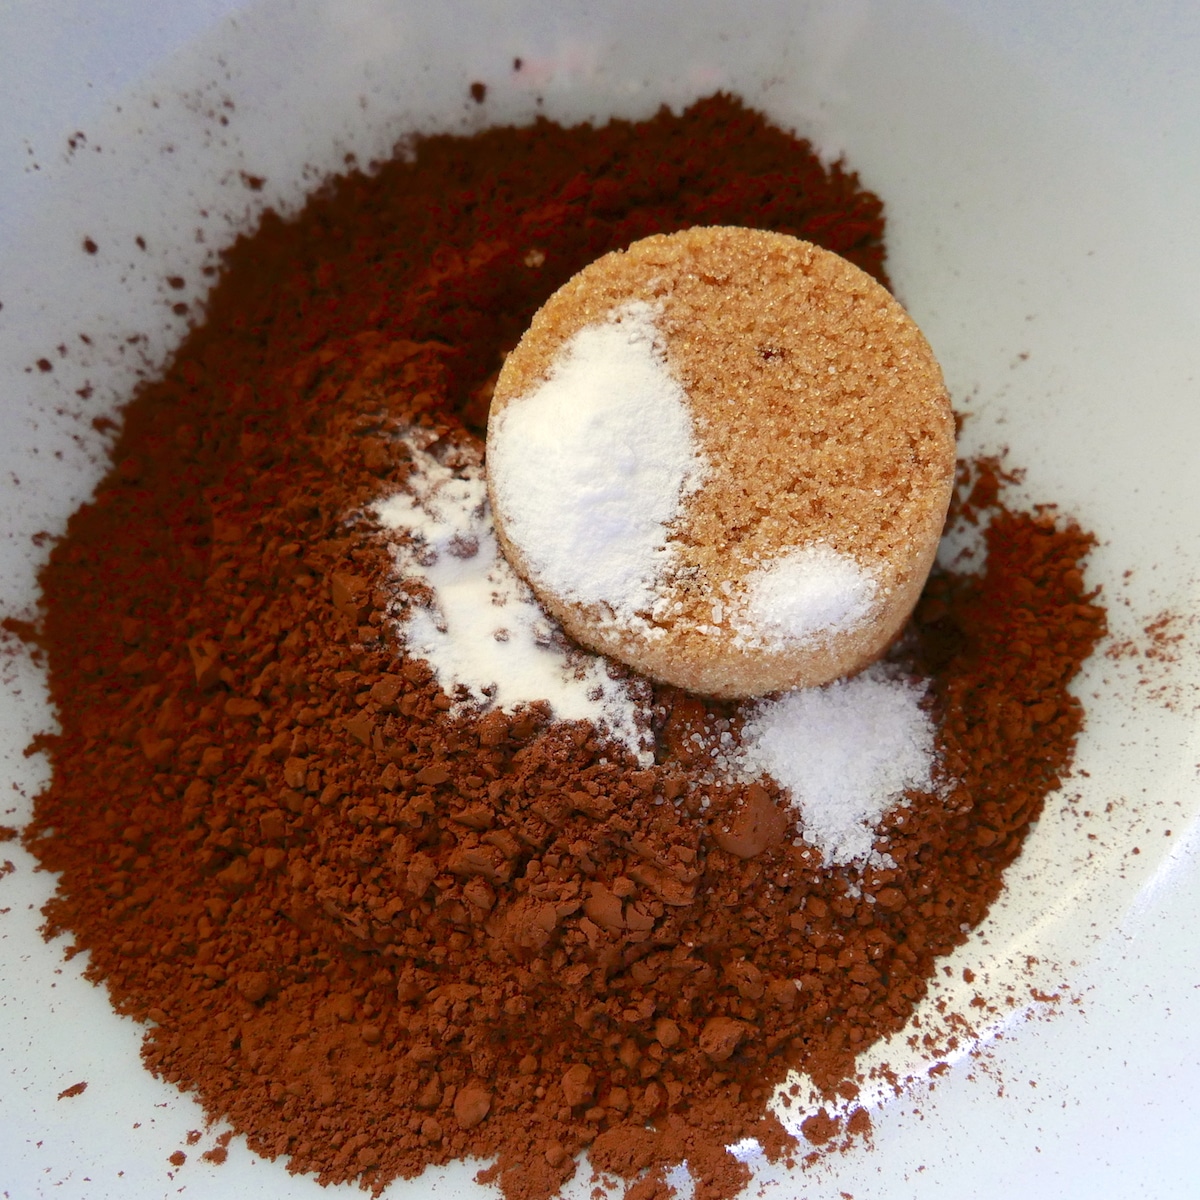 cocoa powder, sugar, baking soda, salt, and spices in a mixing bowl.